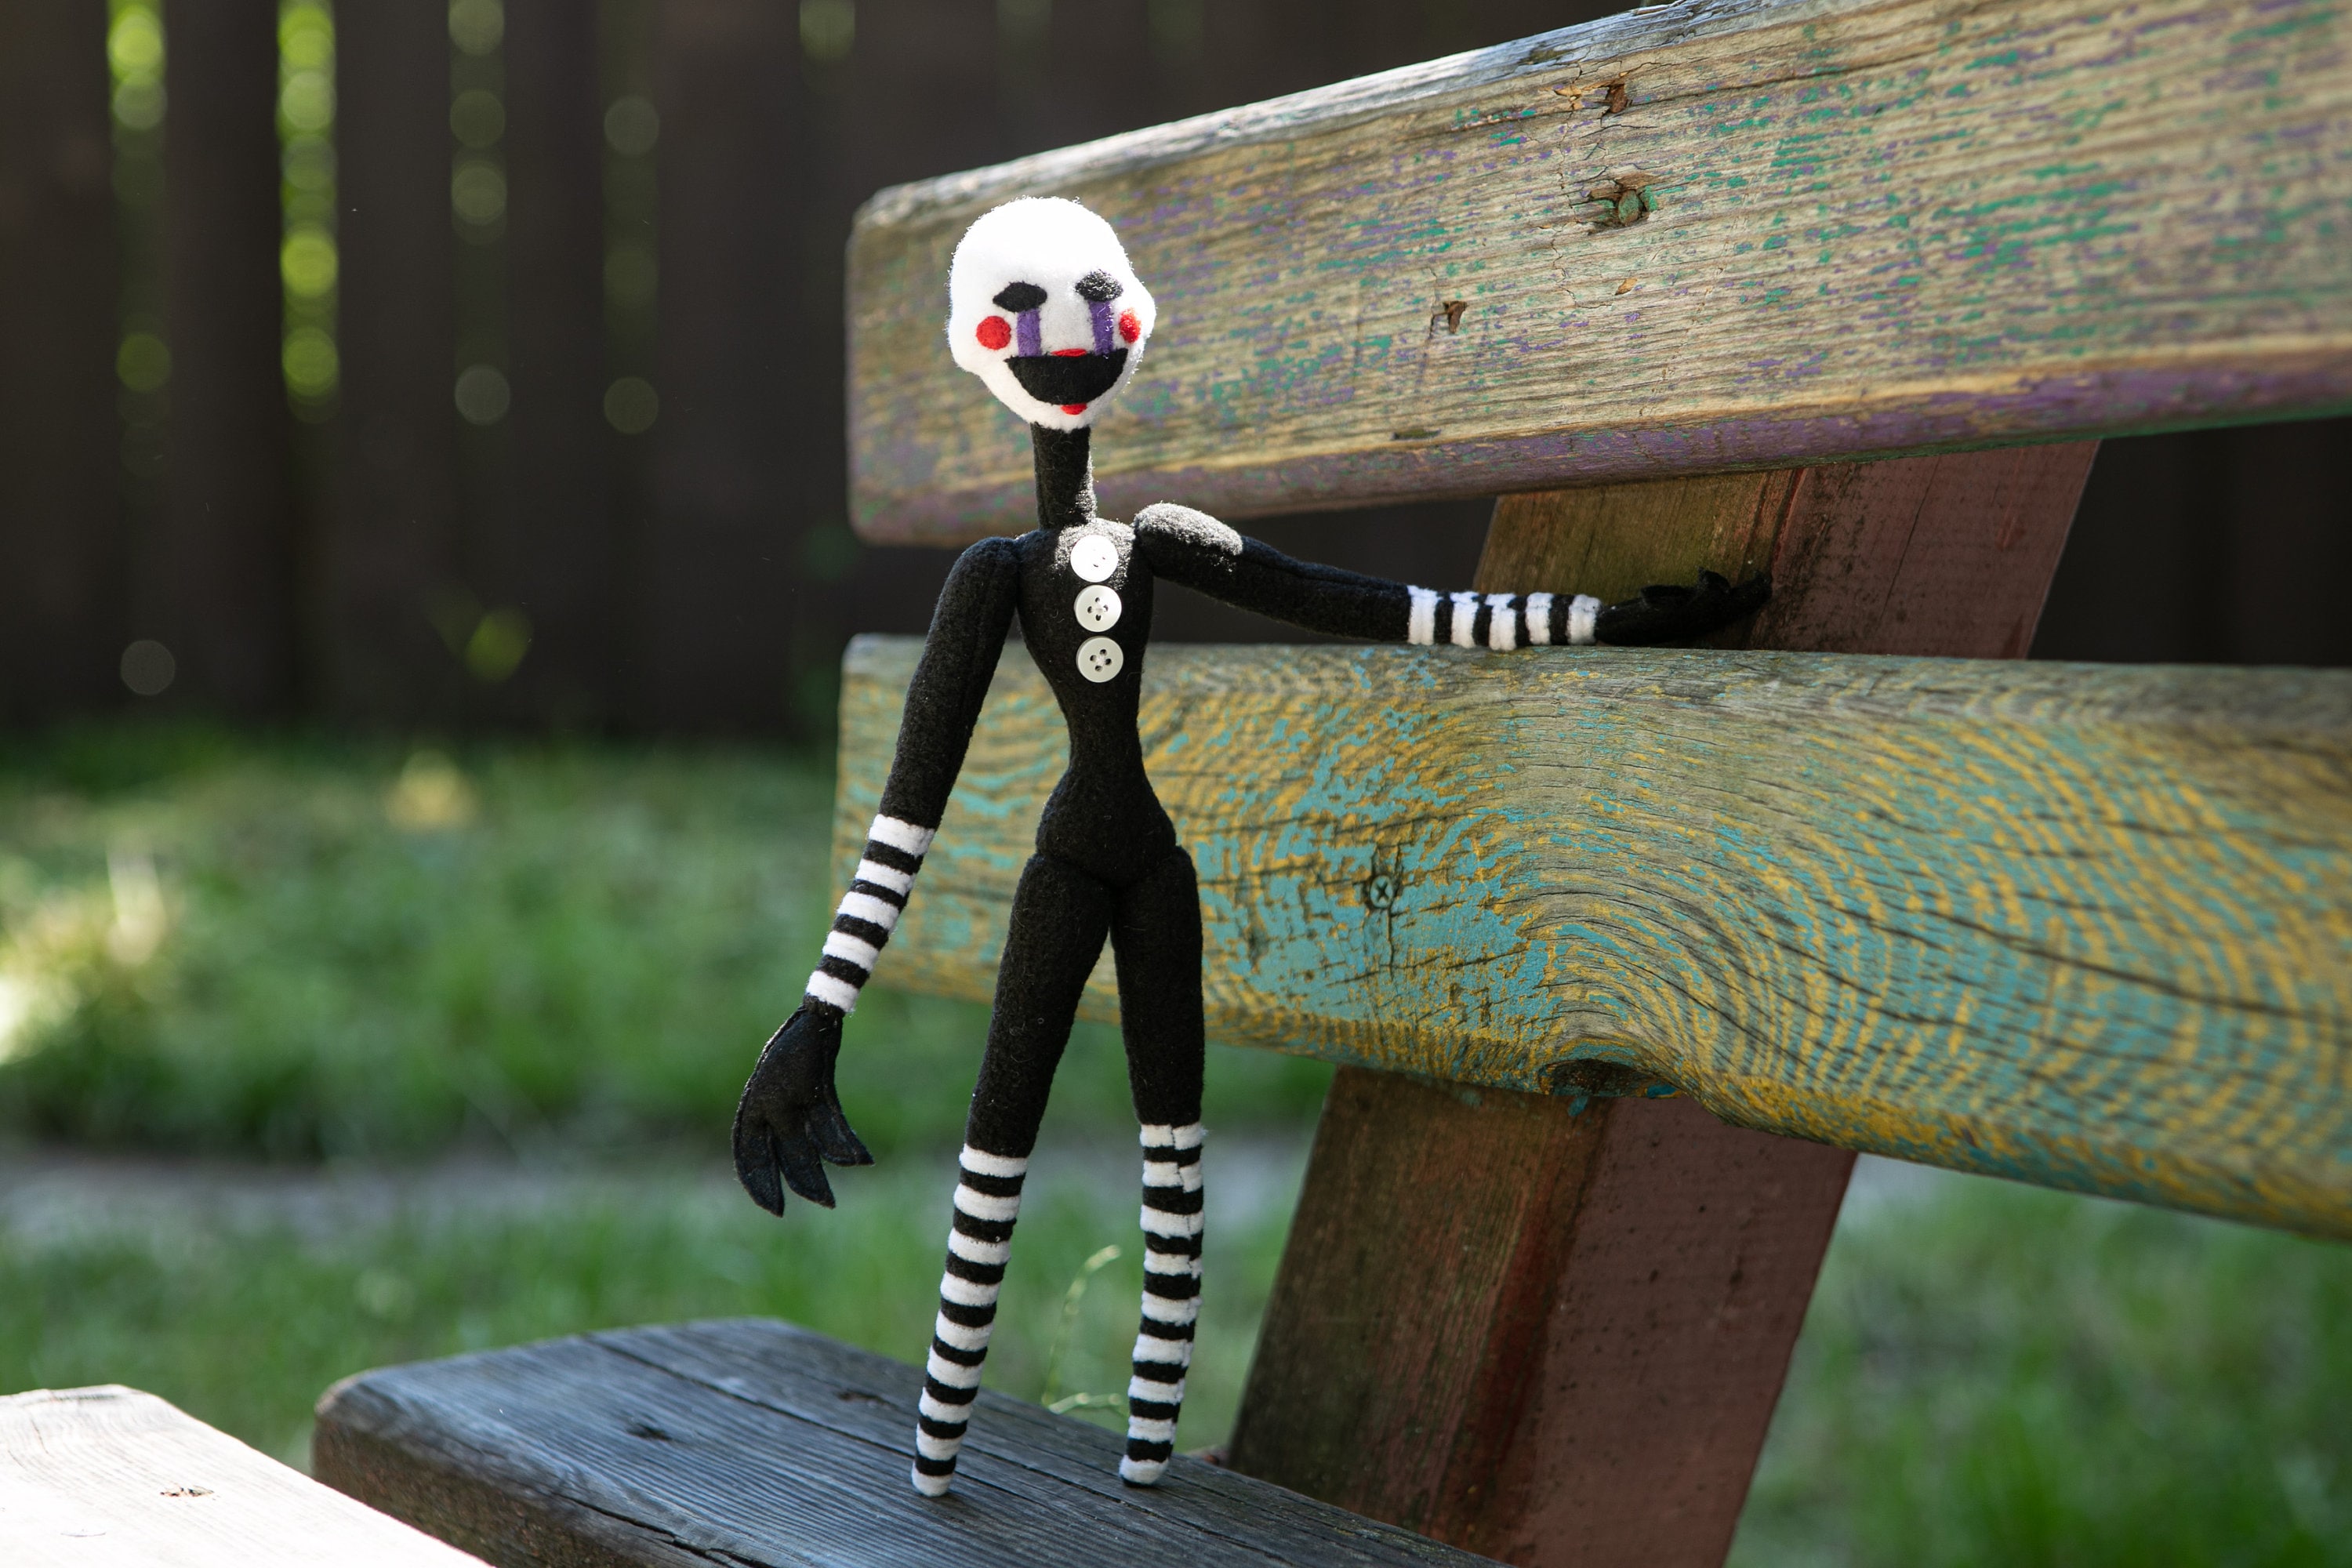 Five Nights At Freddy's Puppet Marionette Necklace